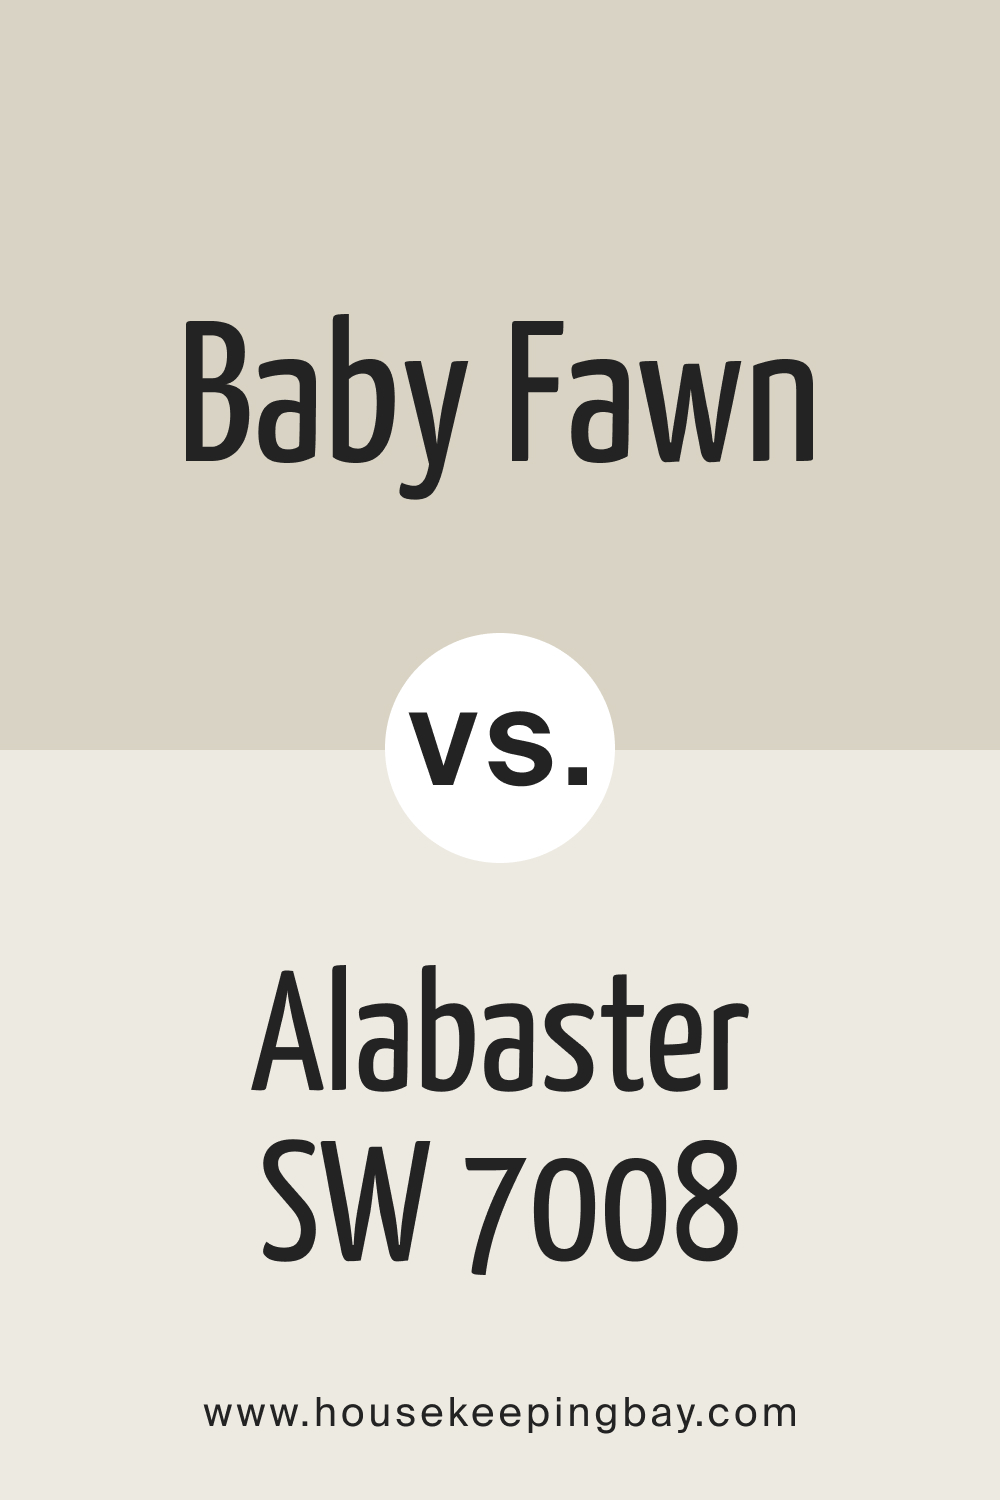 Baby Fawn vs Alabaster SW 7008